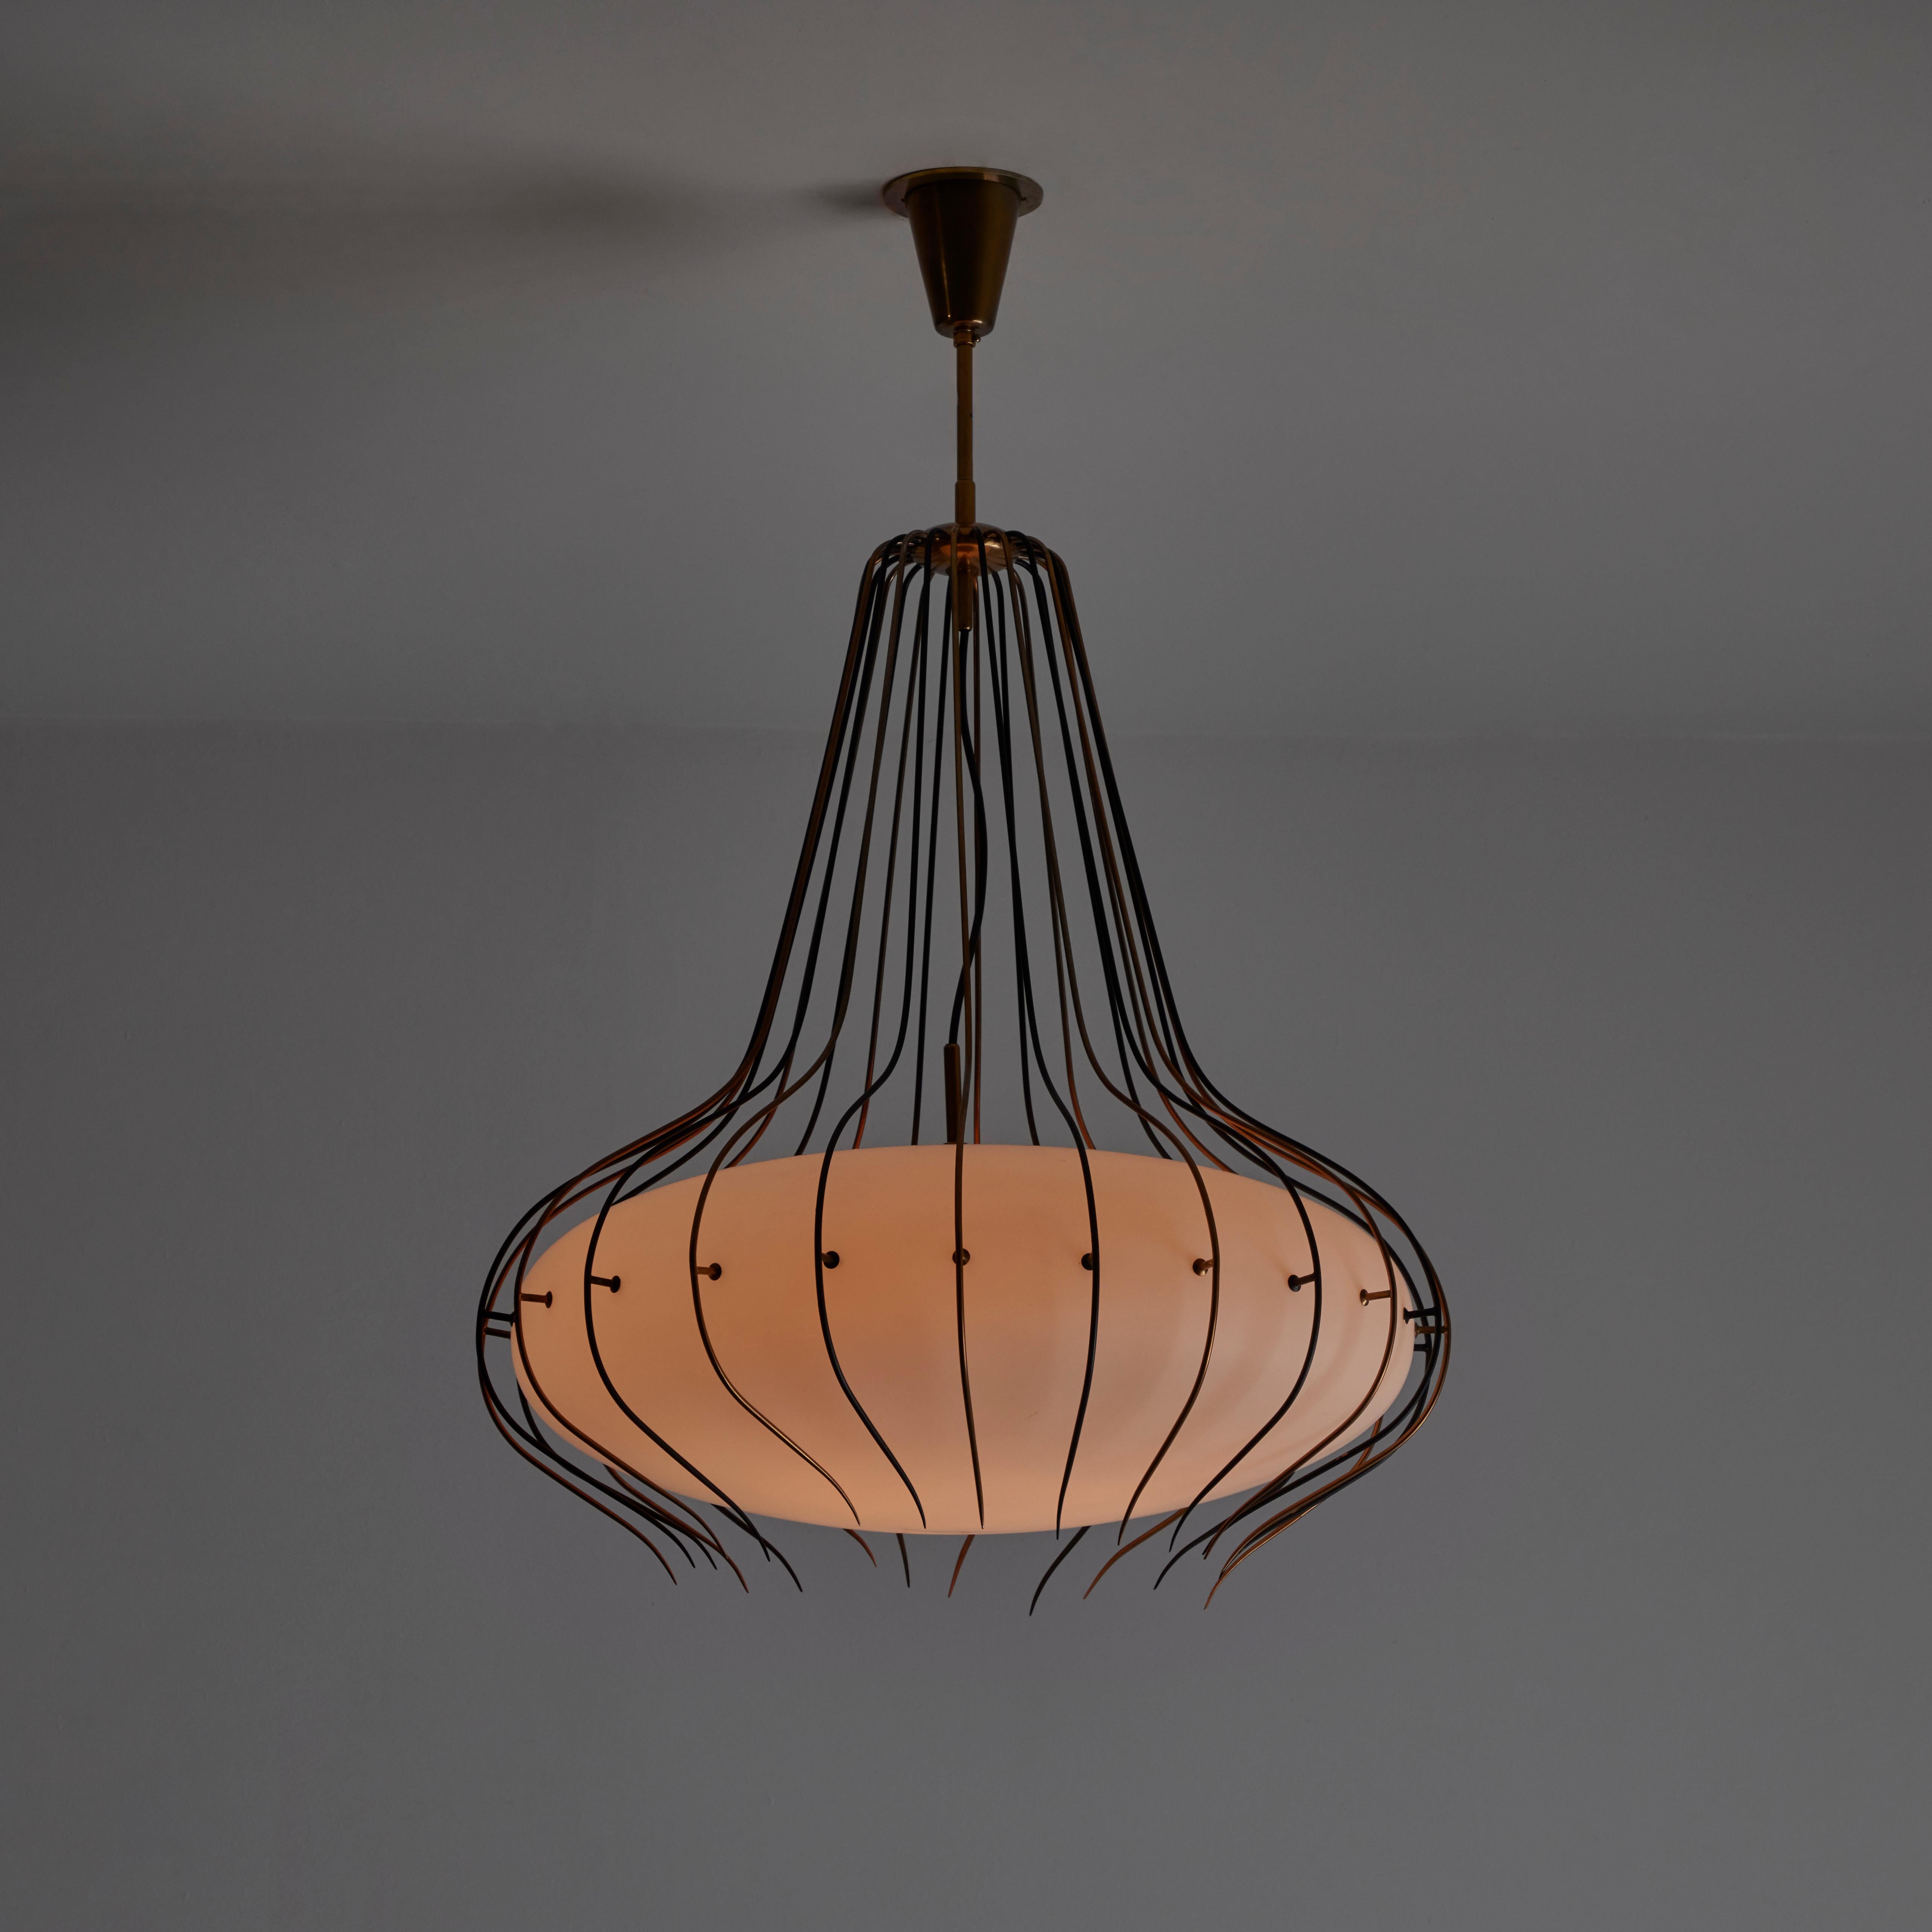 Angelo Lelii for Arredoluce 'Medusa' chandelier, model '12699'. Designed and manufactured in Italy, in 1958. Incredibly striking chandelier featuring a delicate and custom enameled brass frame that gently holds a stunning opaline glass shade. The